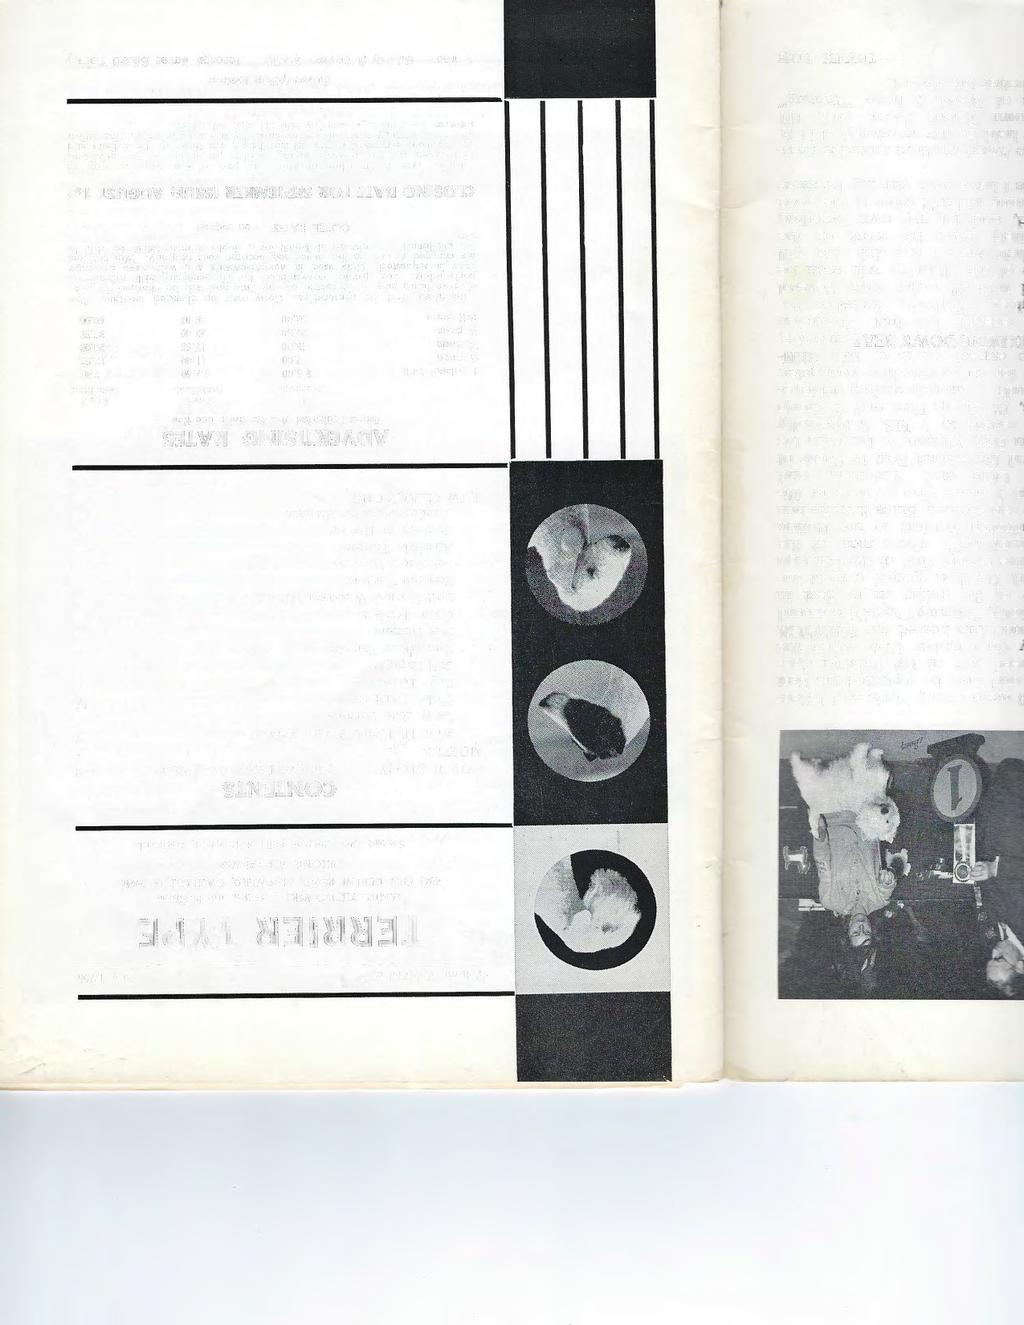 Volume V, Number 7 July, 1966 DANIEL KIEDROWSKI - Editor and Publ isher 4961 OLD DUBLIN ROAD, HAYWARD, CALIFORNIA 94546 PHONE: 415-581-6062 Second Class Postage Pa id at Haywa rd, California CONTENTS